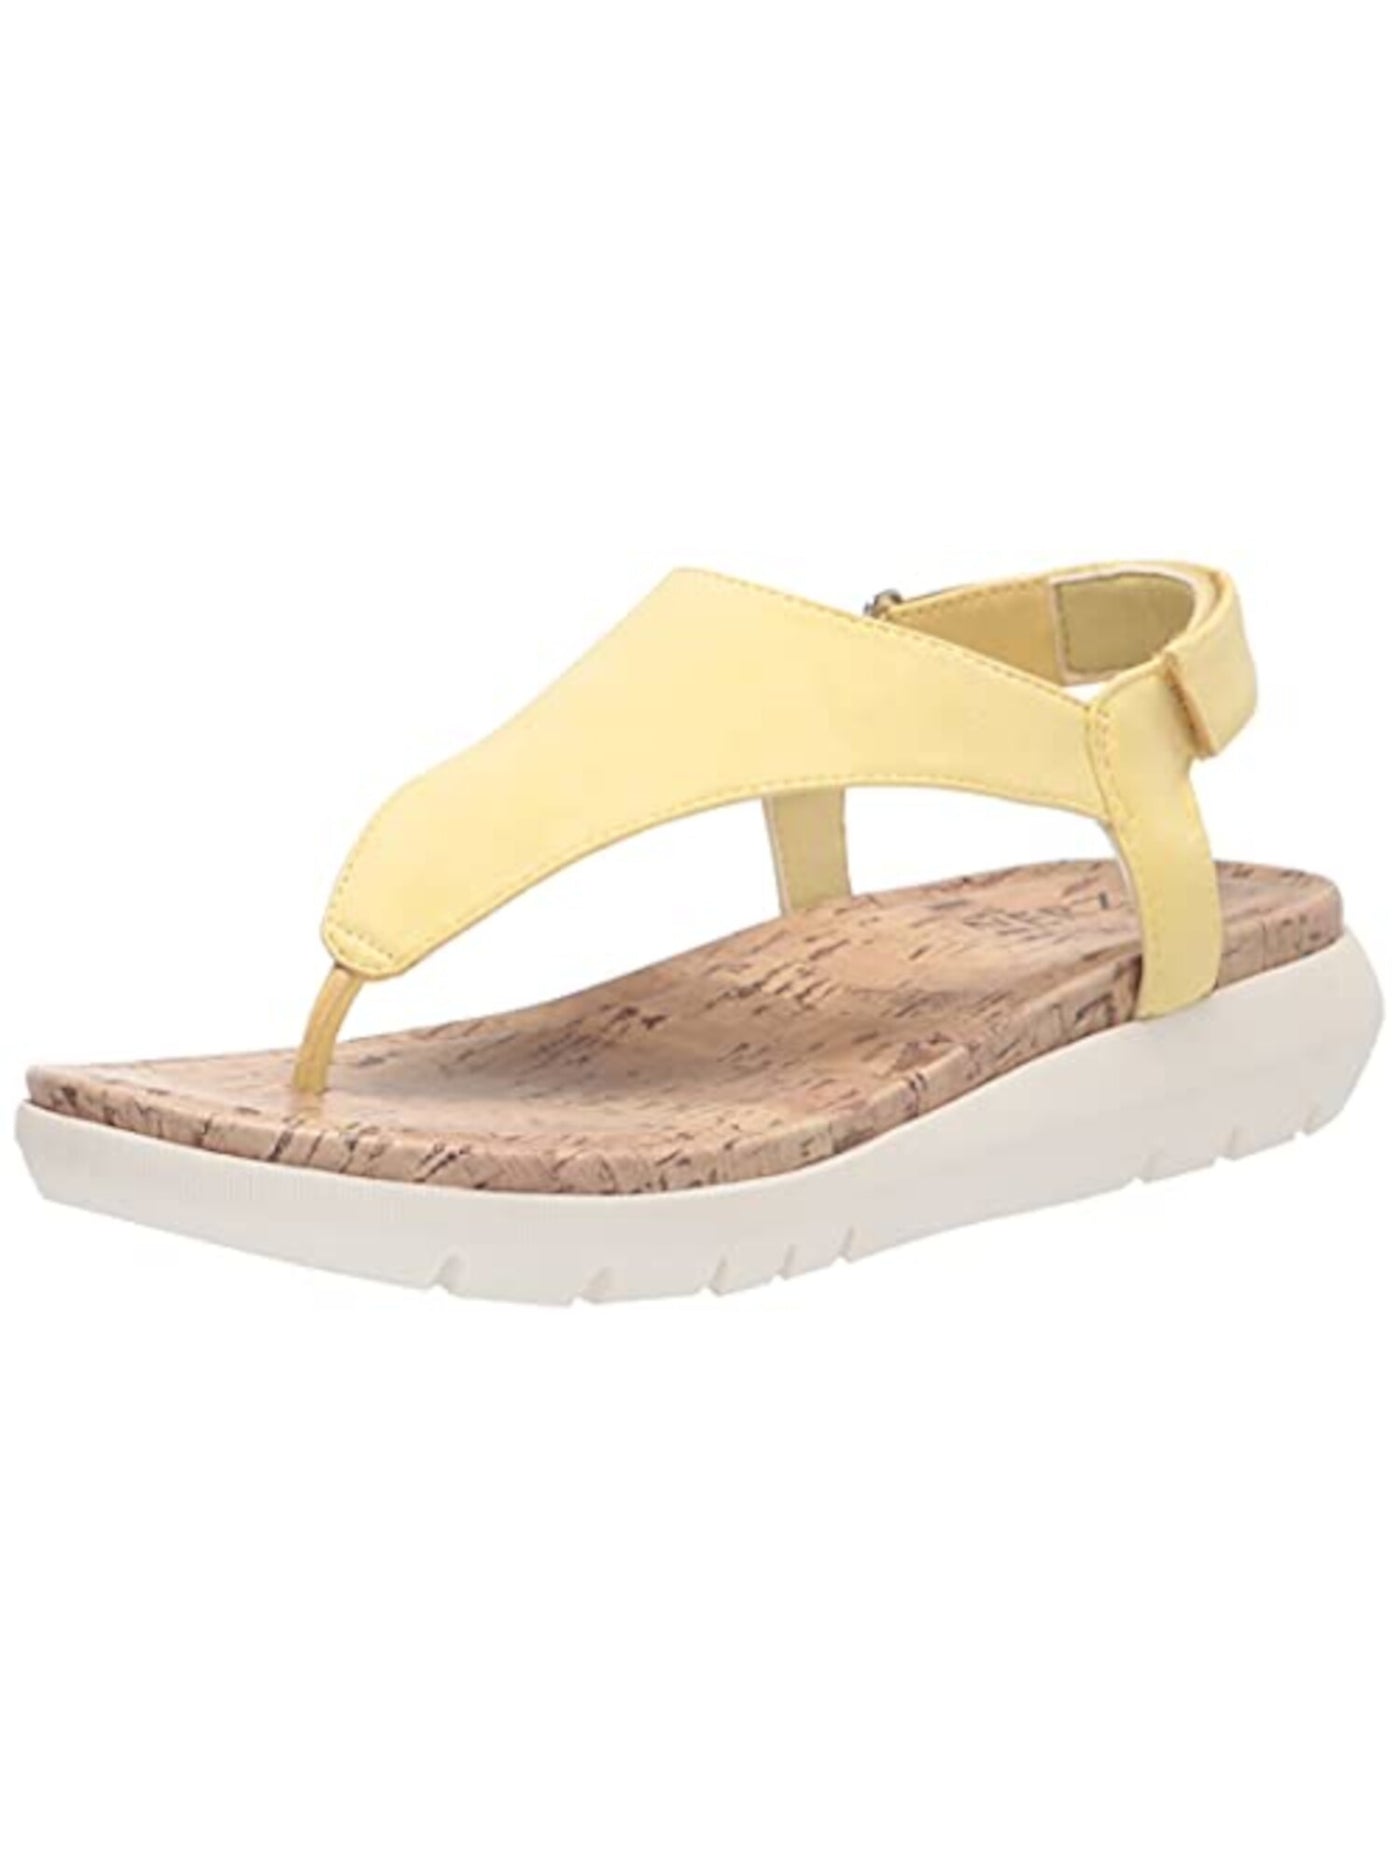 NATURALIZER Womens Iced Lemon Yellow Lightweight Adjustable Non-Slip Comfort Meghan Round Toe Wedge Thong Sandals Shoes 10 M